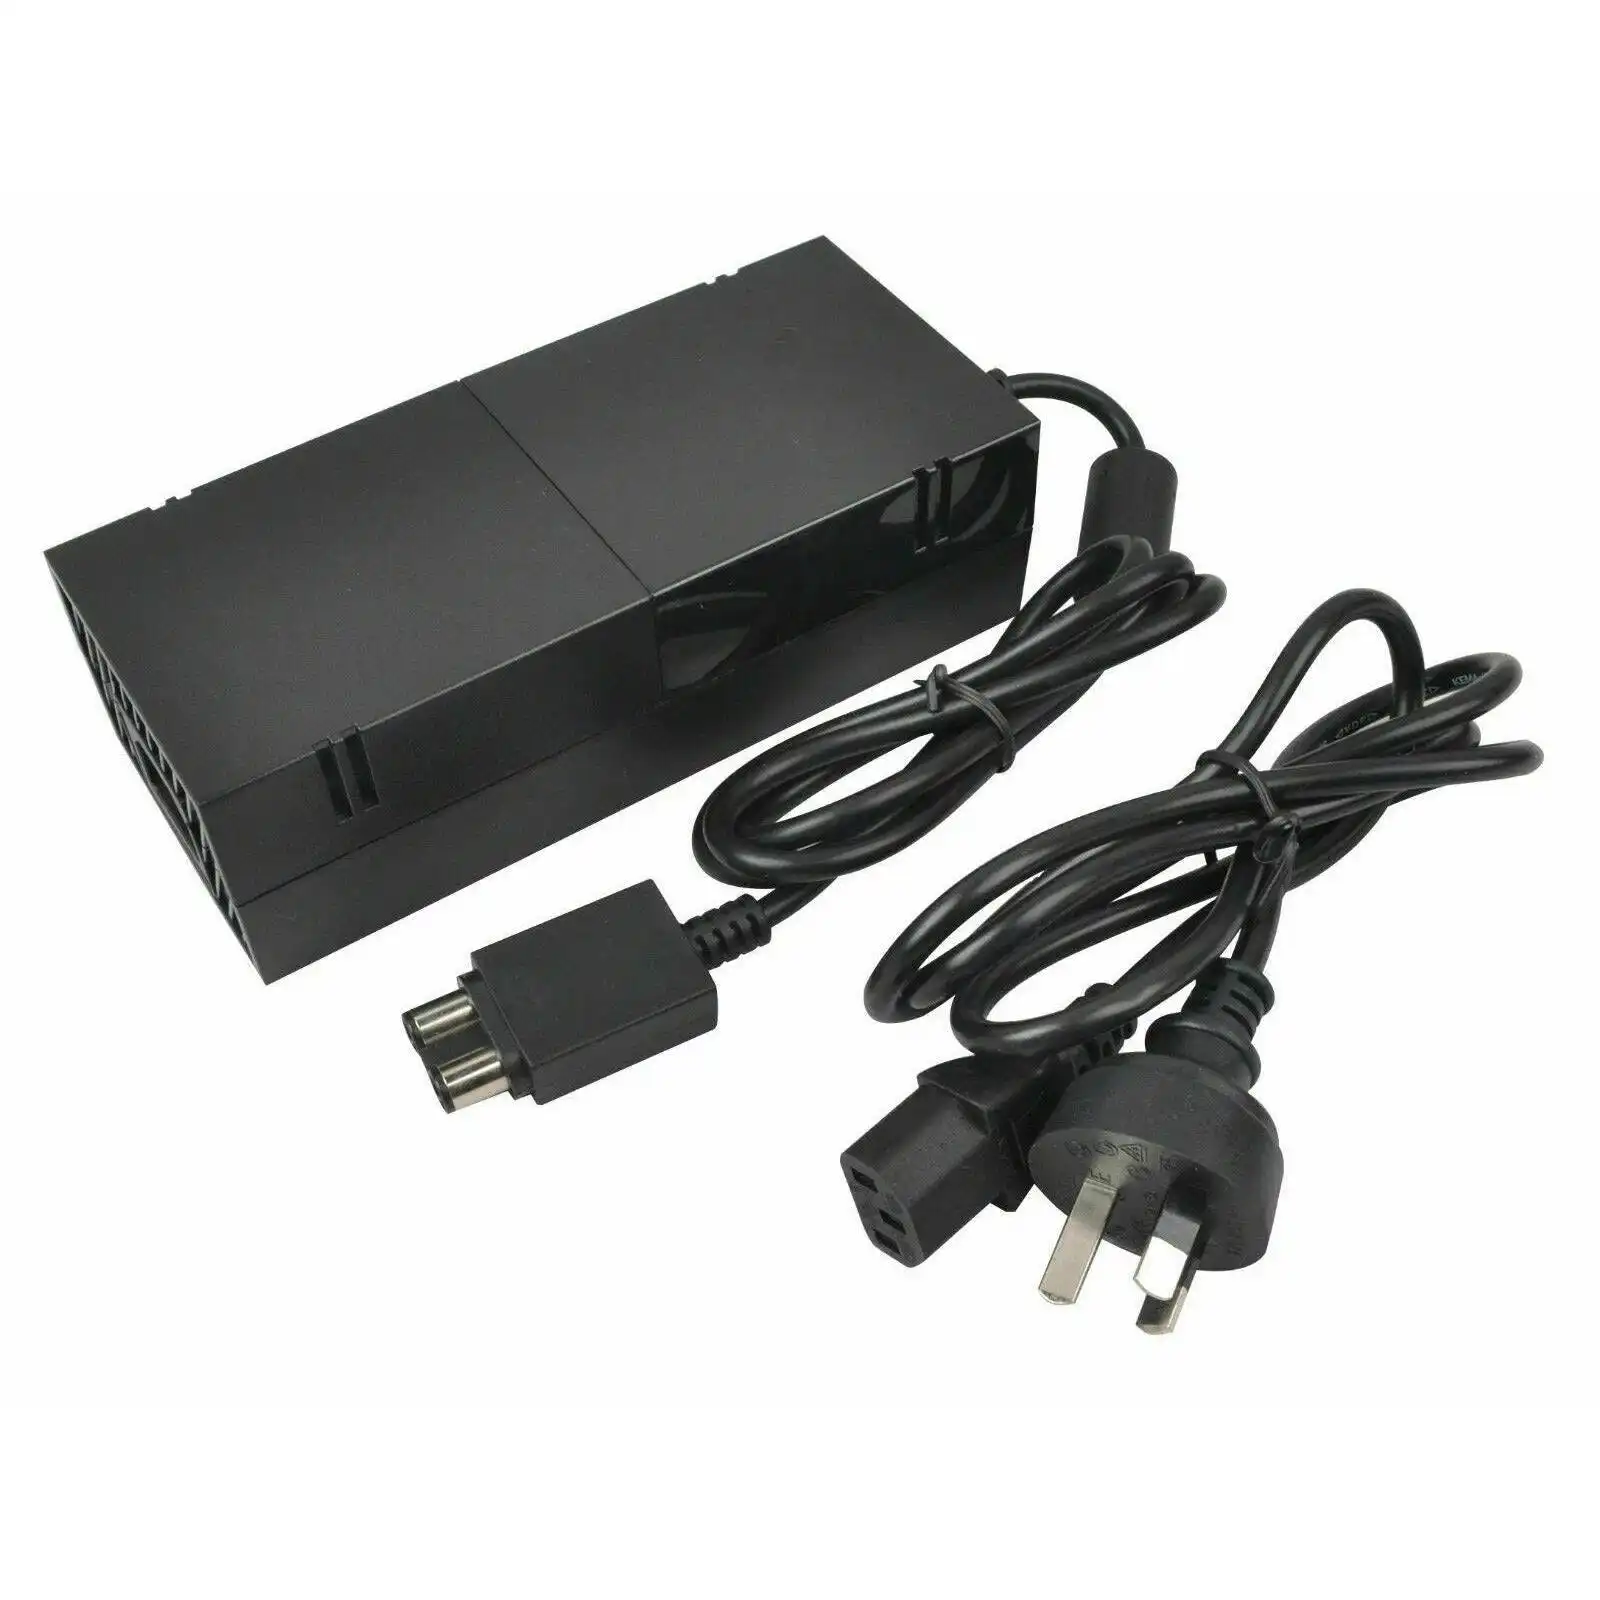 XBOX ONE AC Adapter Charger Cord Mains Power Supply Brick Up to 1 TB